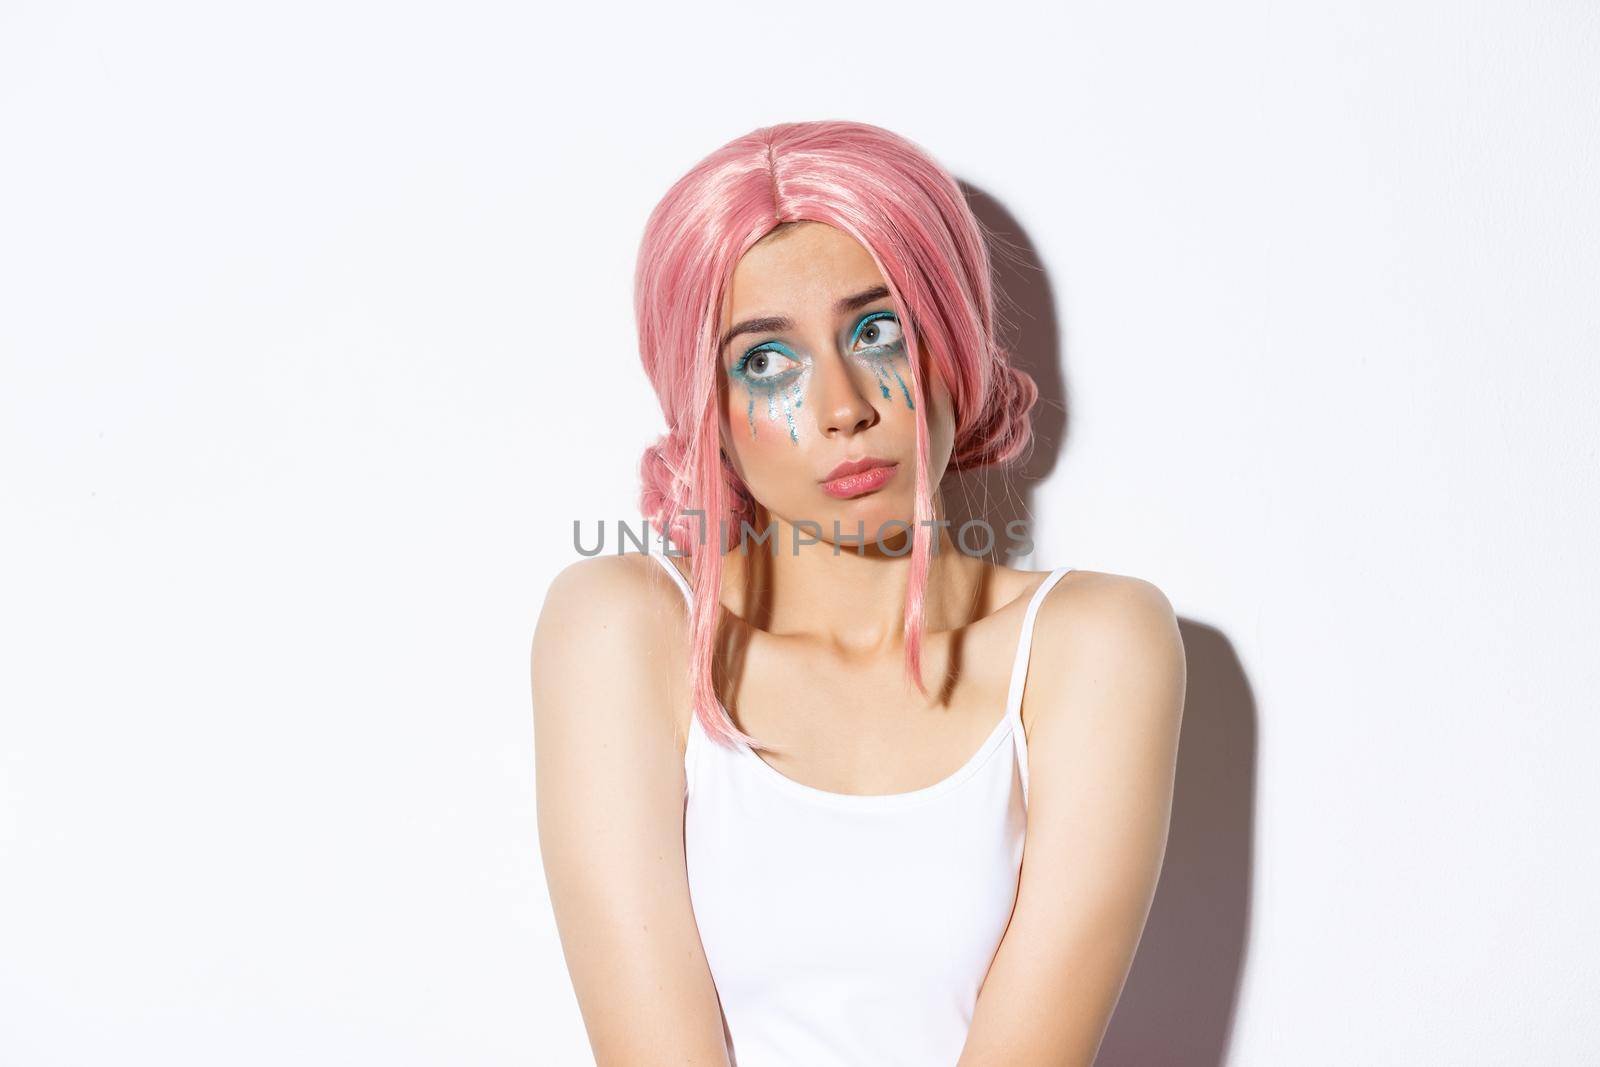 Image of beautiful indecisive girl in halloween costume and pink wig, looking at upper left corner doubtful, standing over white background.